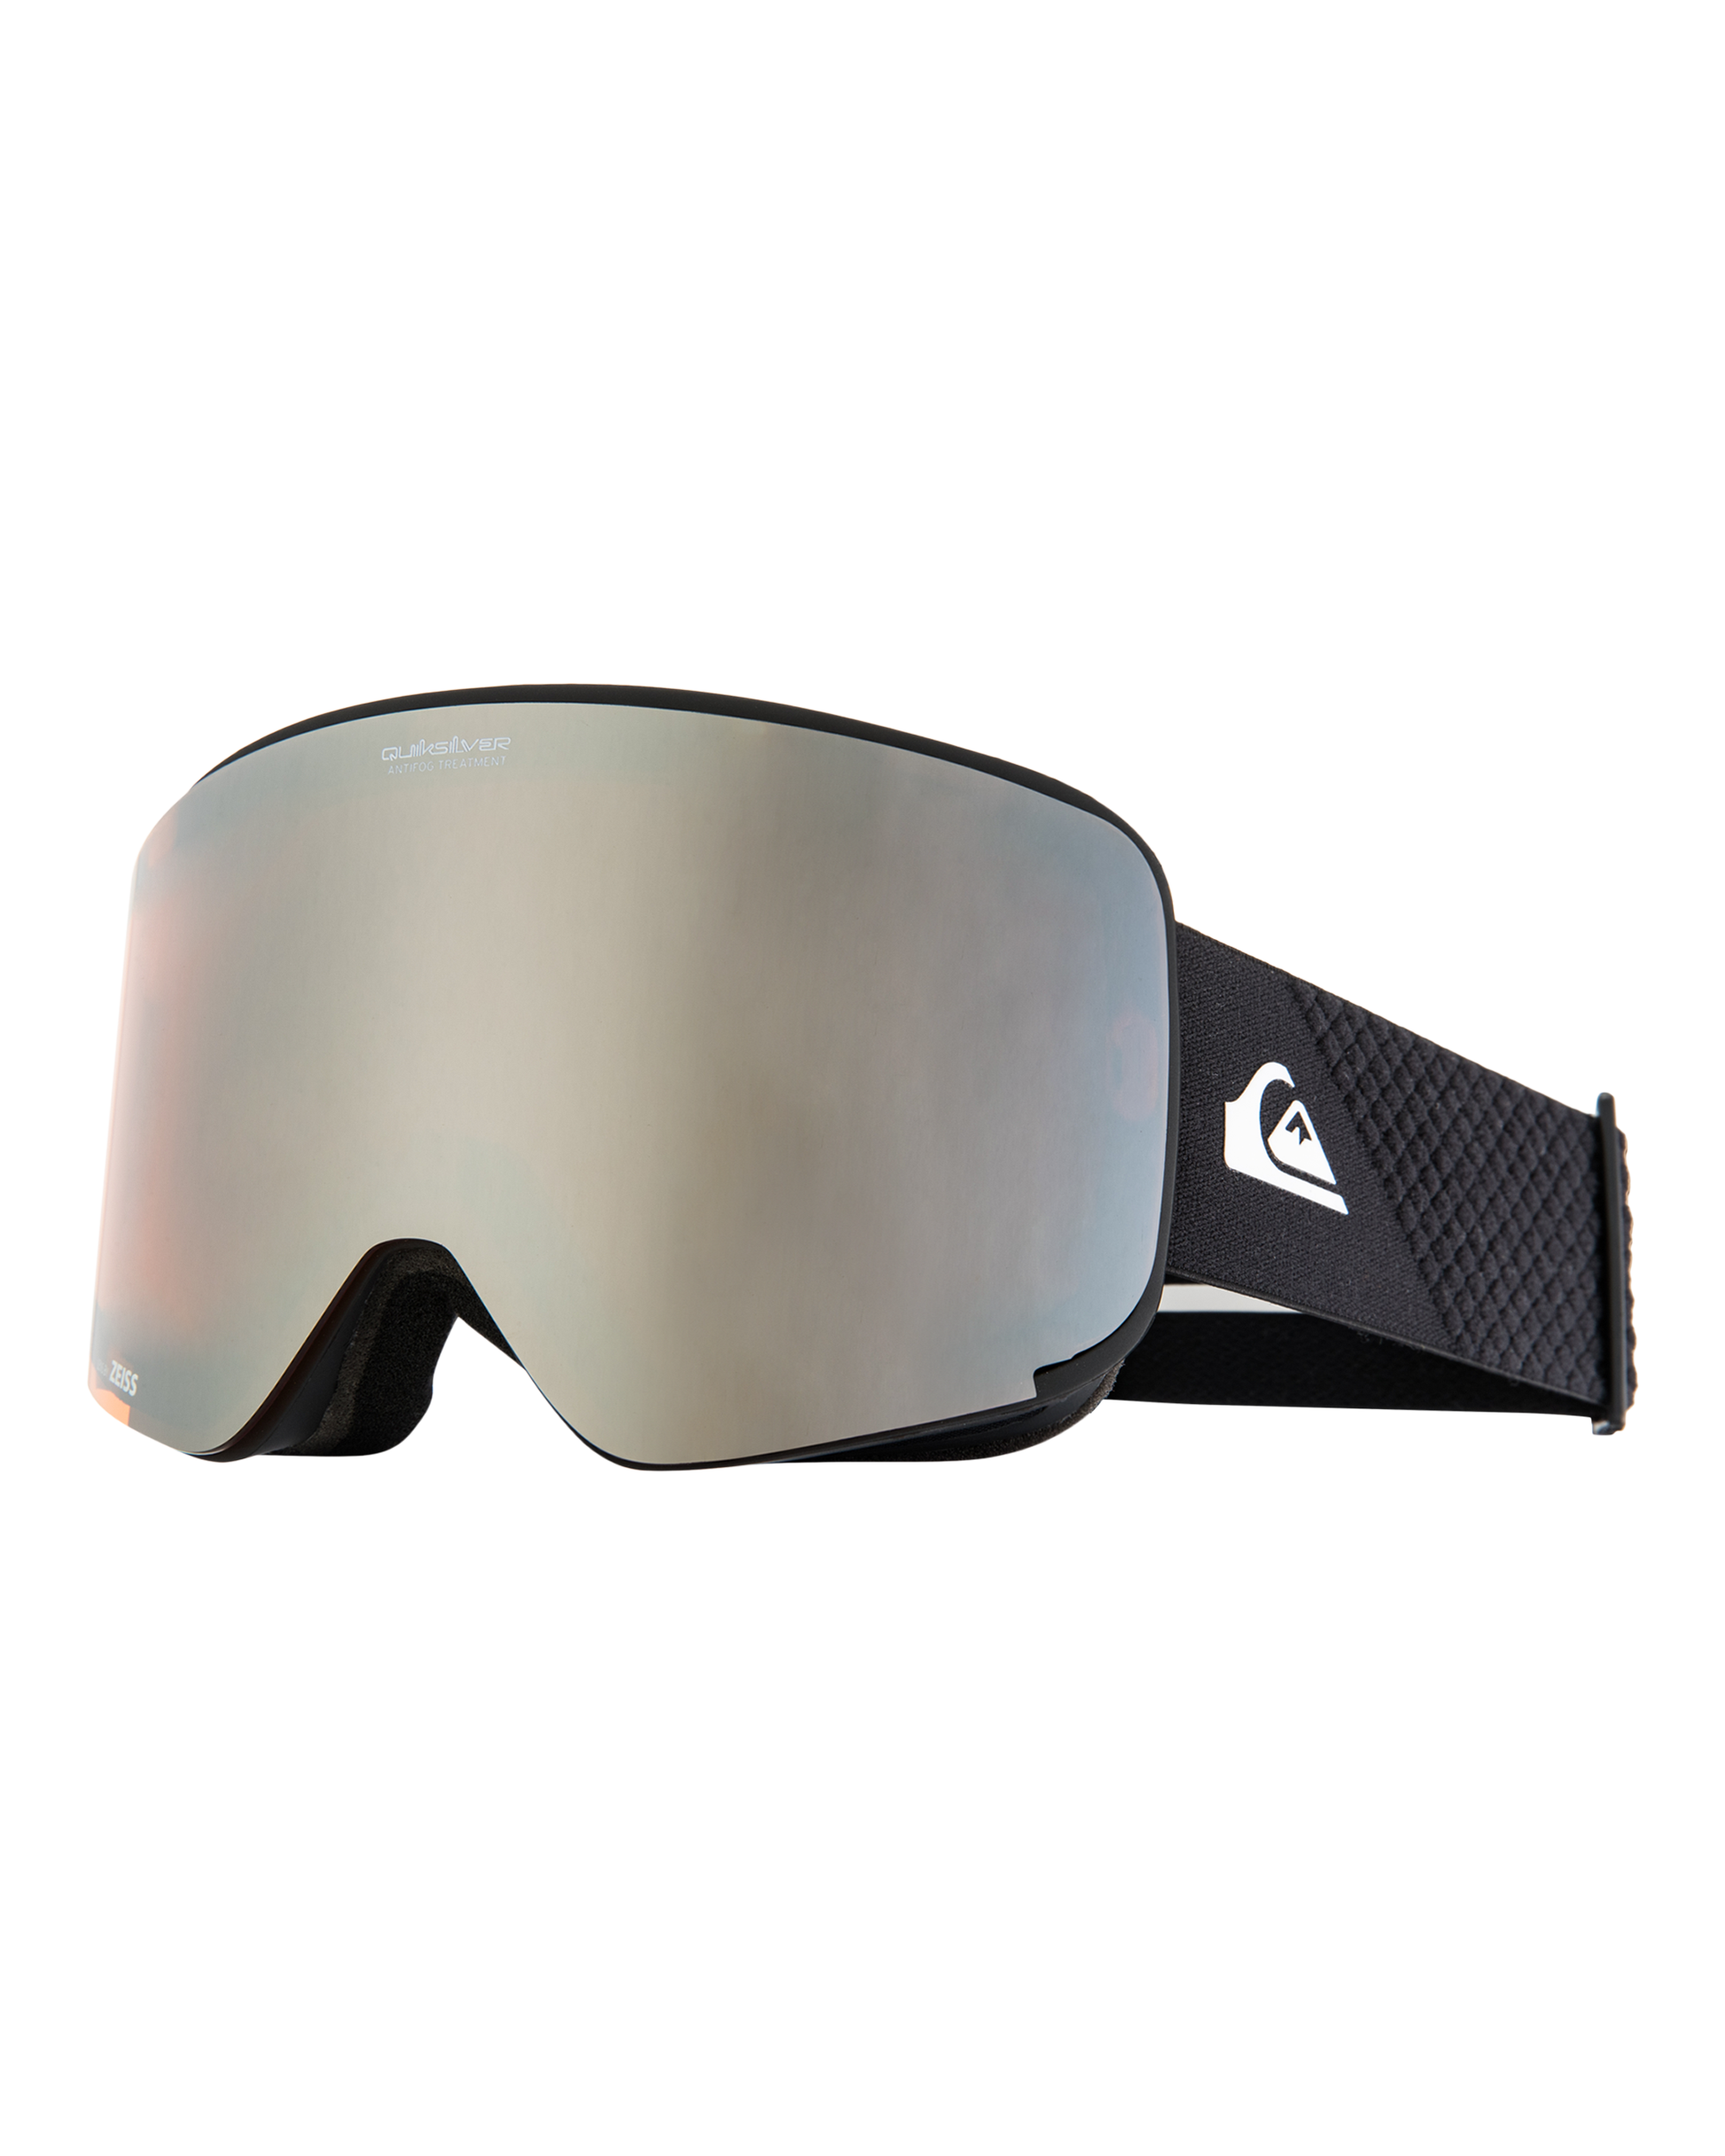 The Switchback Goggles